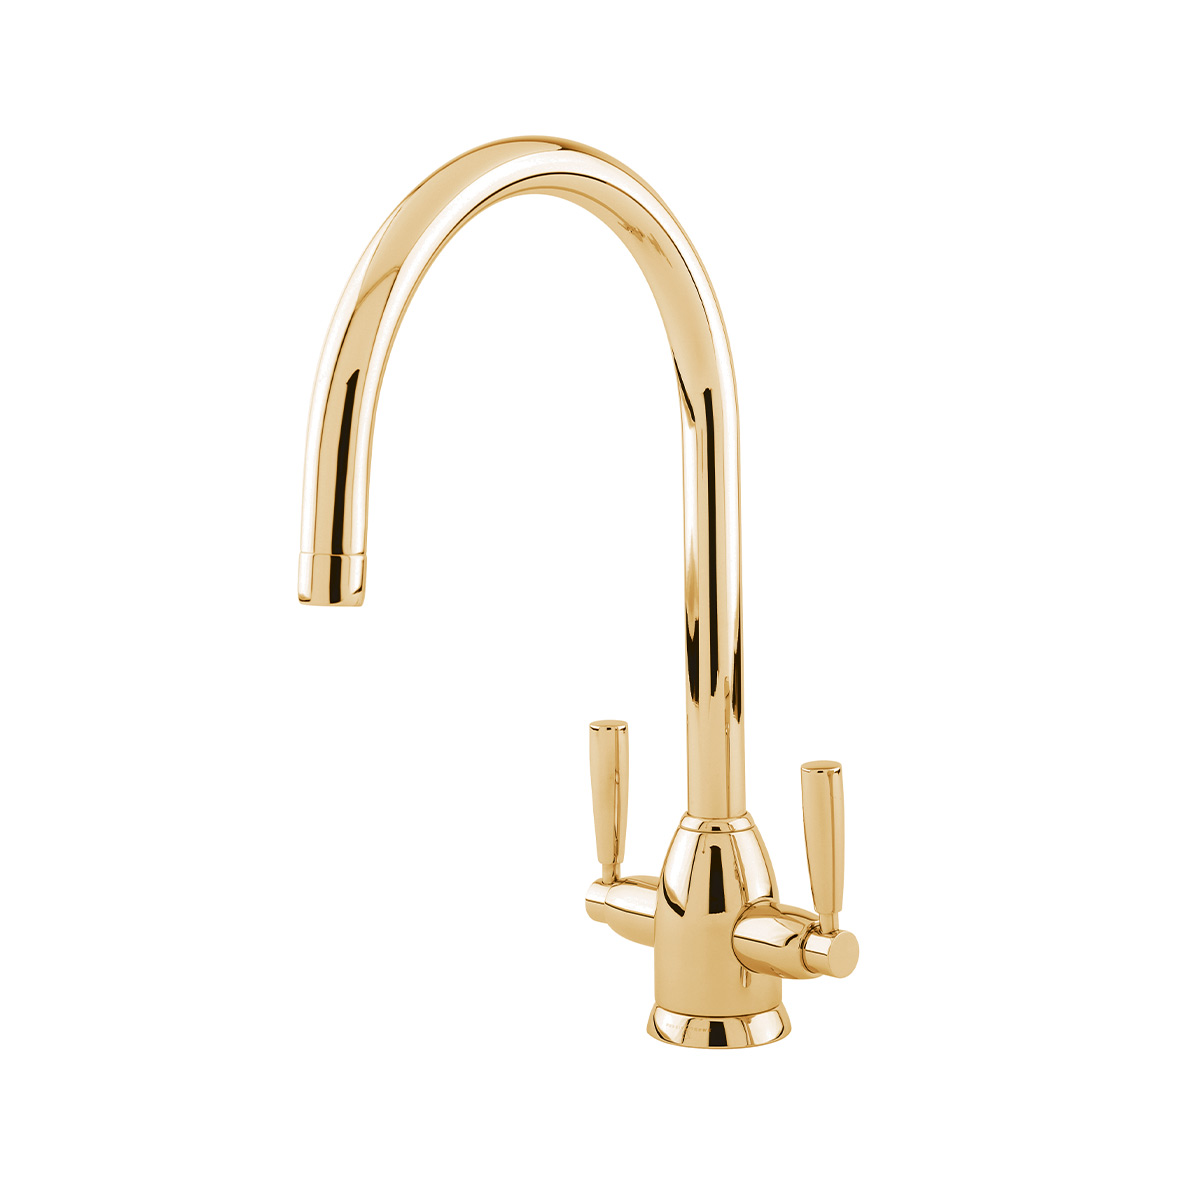 Shaws by Perrin & Rowe Silverdale kitchen mixer in Polished Brass. Oberon style kitchen mixer AUSH.4861. Distributed in Australia by Luxe by Design, Brisbane.